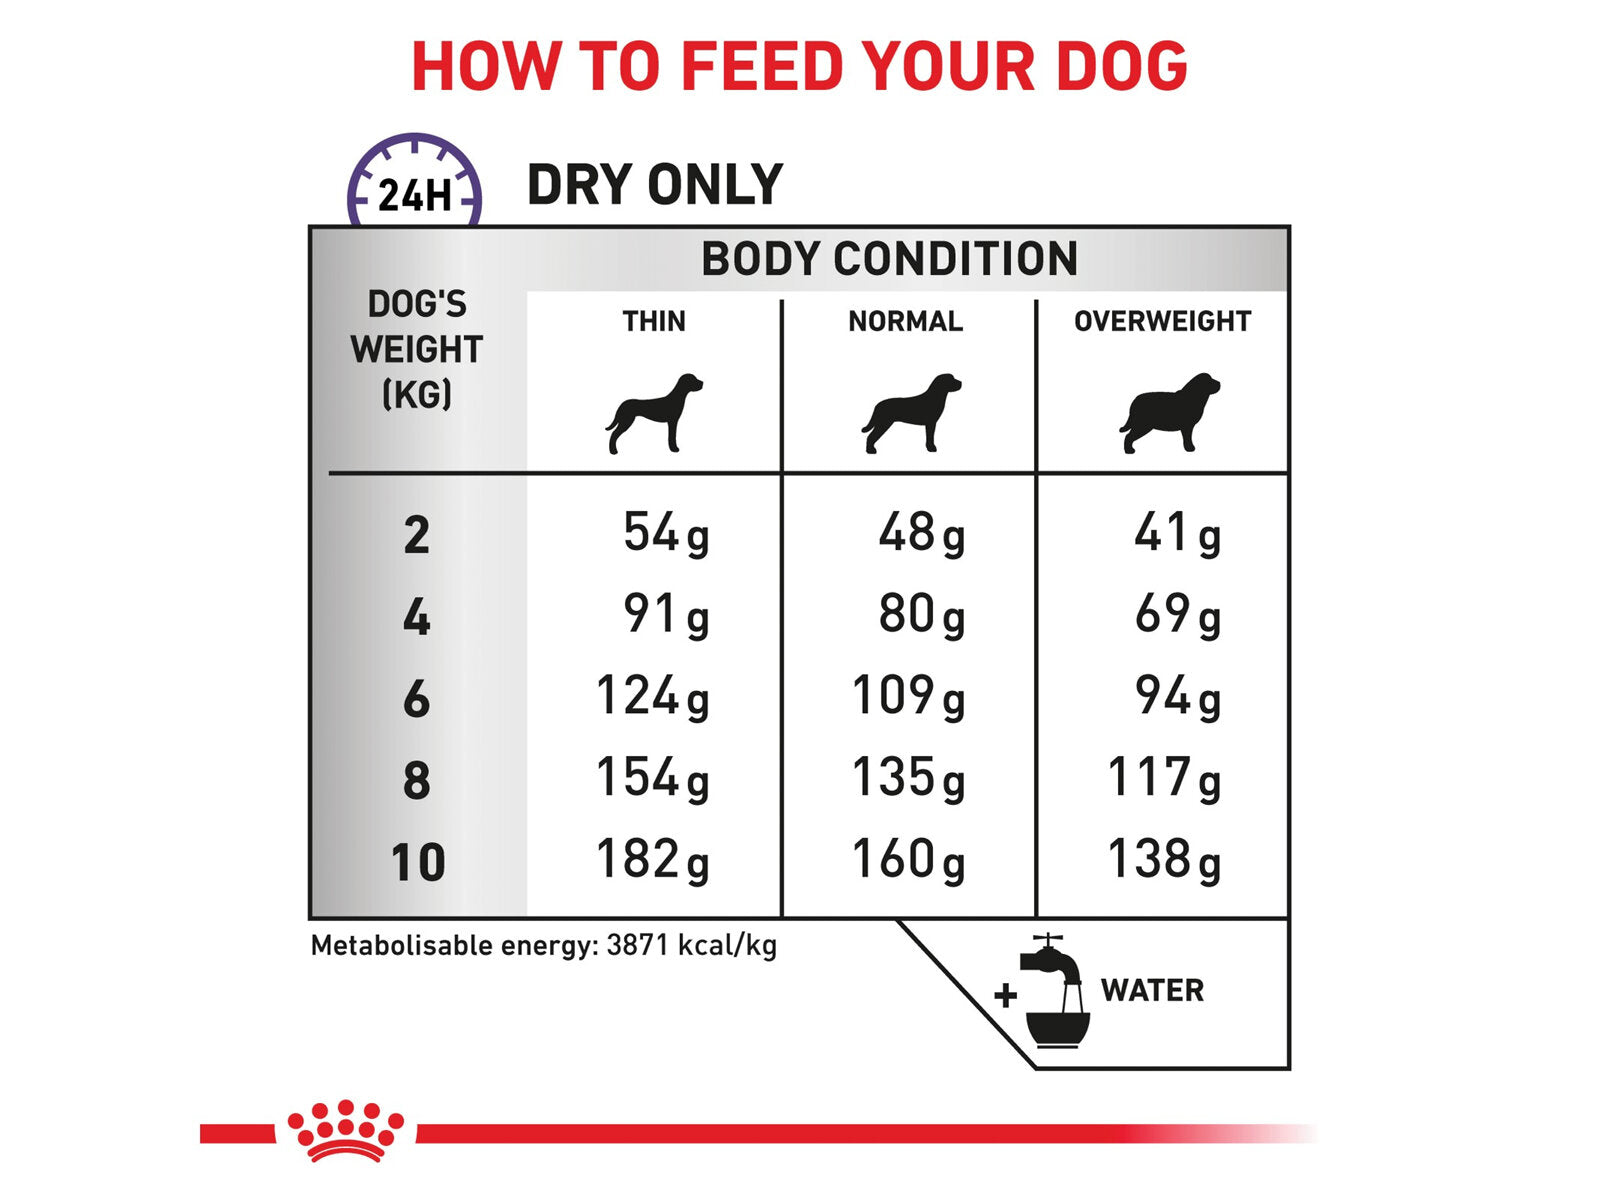 ROYAL CANIN® Veterinary Diet Canine Adult Small Dogs Dry Dog Food With Rise, 8kg